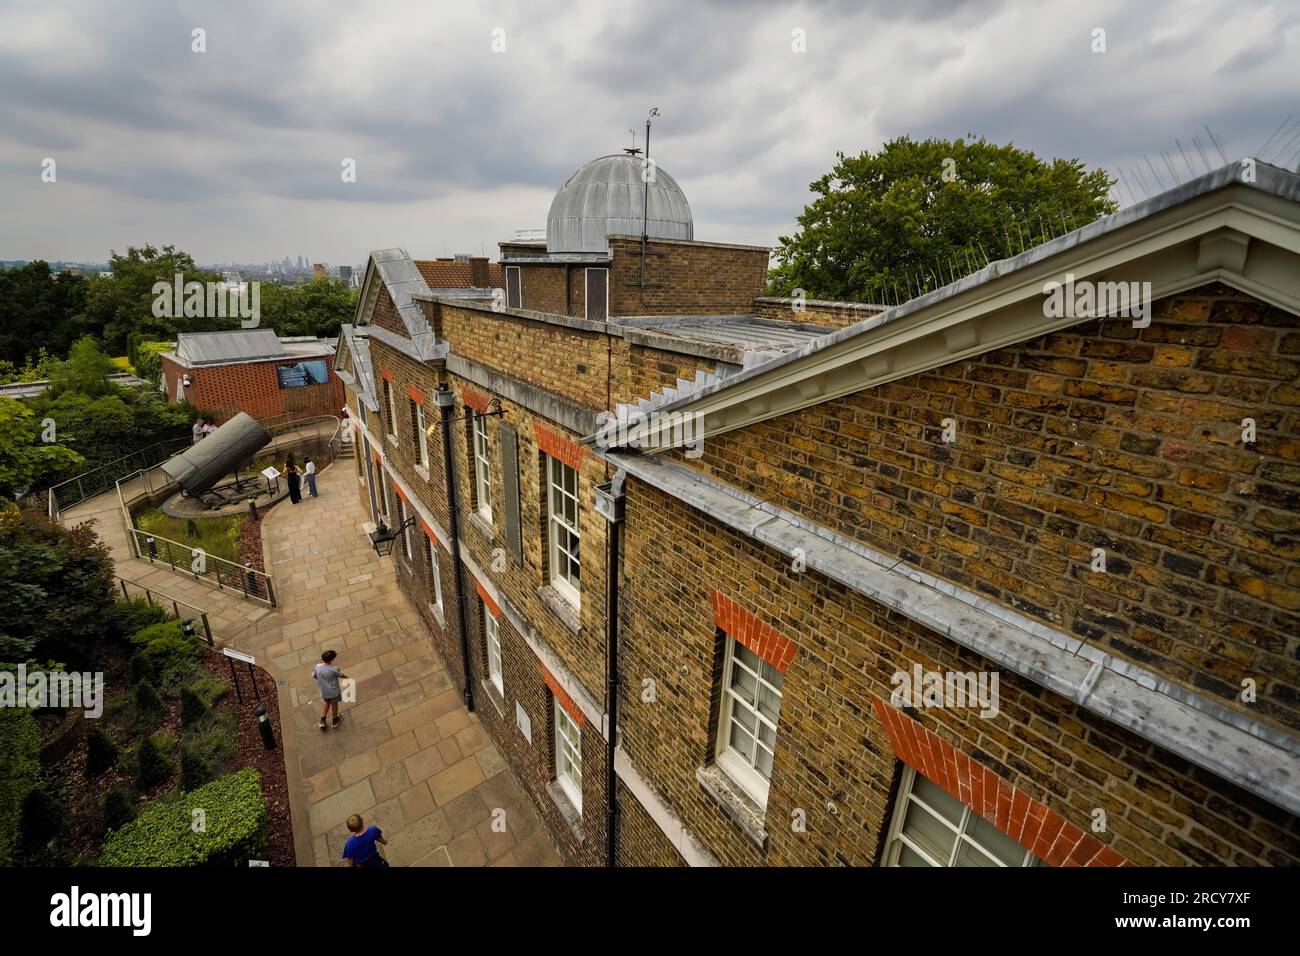 The Royal Observatory Greenwich, London's Planetarium. Stand on the Prime Meridian Line and enjoy the Flamsteed House, Octagon Room, red Time Ball. Stock Photo